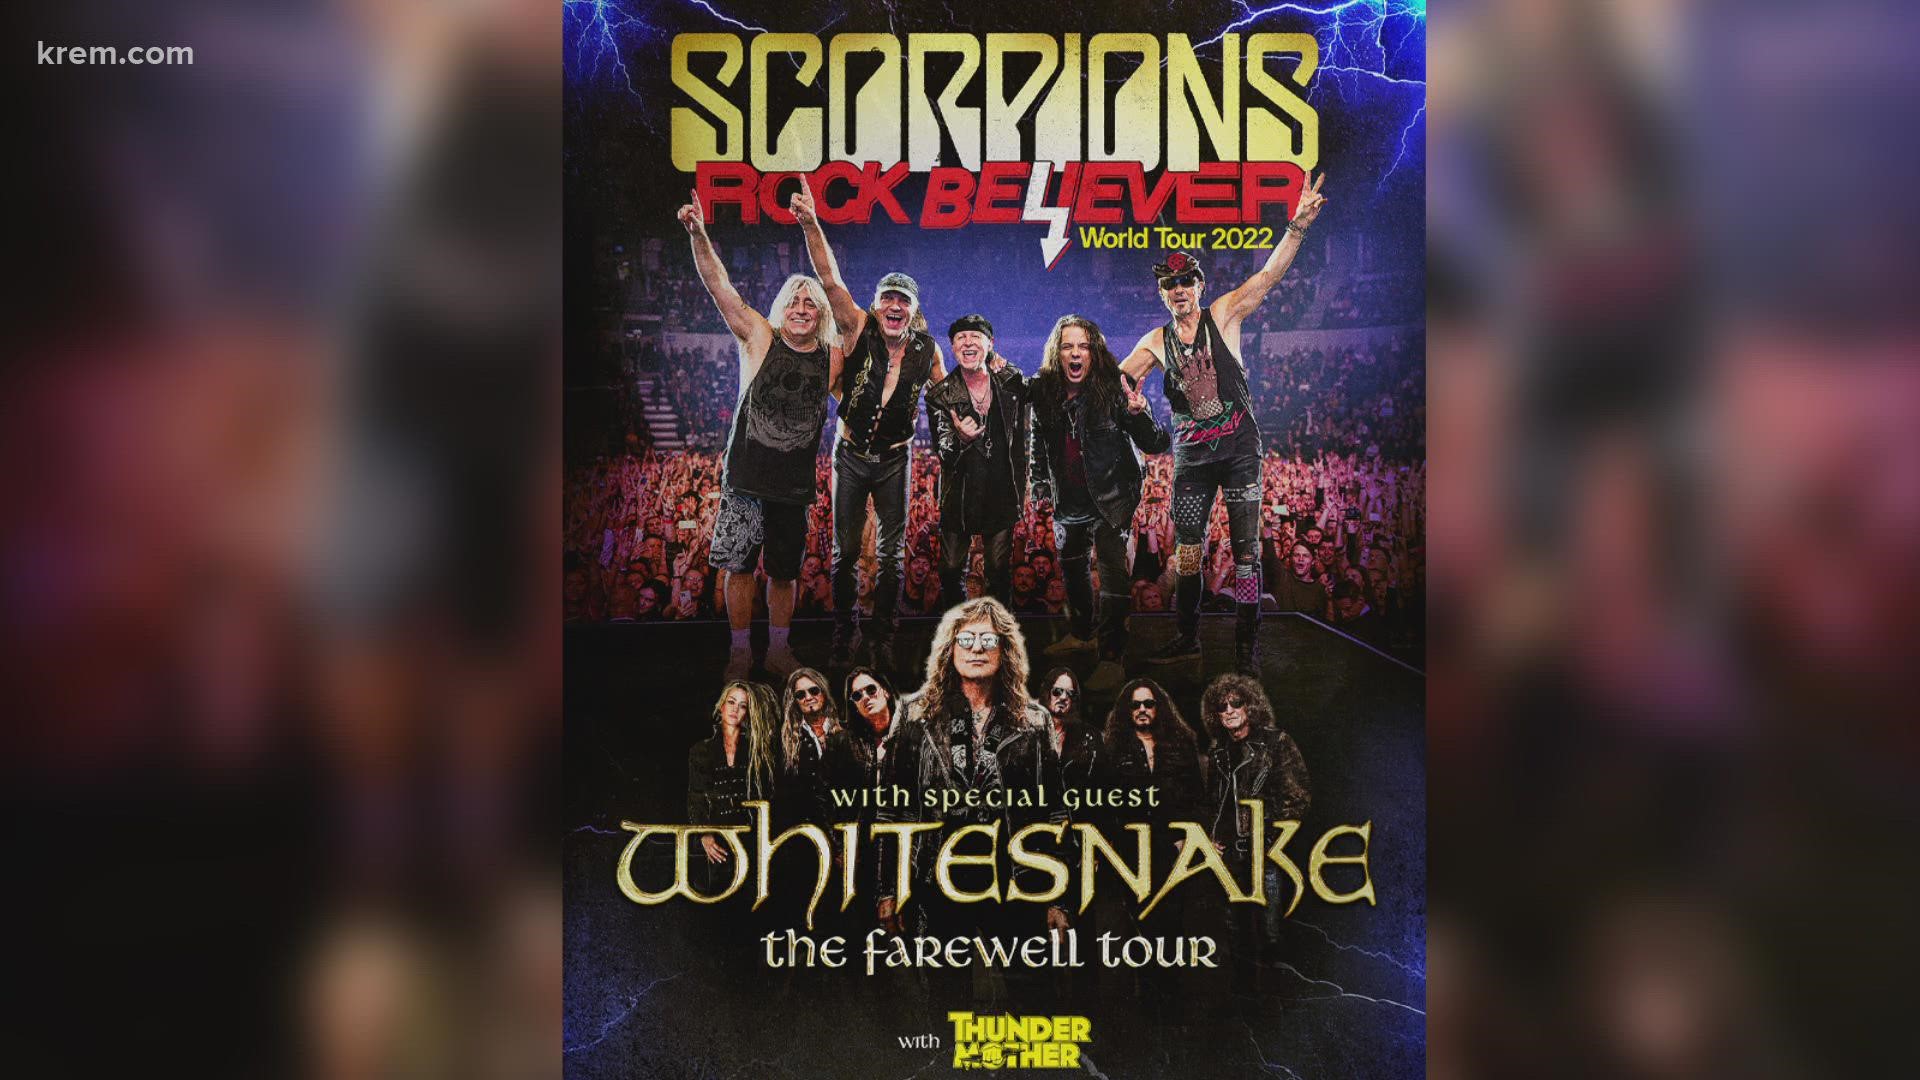 The band will make a stop at the Spokane Arena on Thursday, Oct. 13, with special guest Whitesnake.